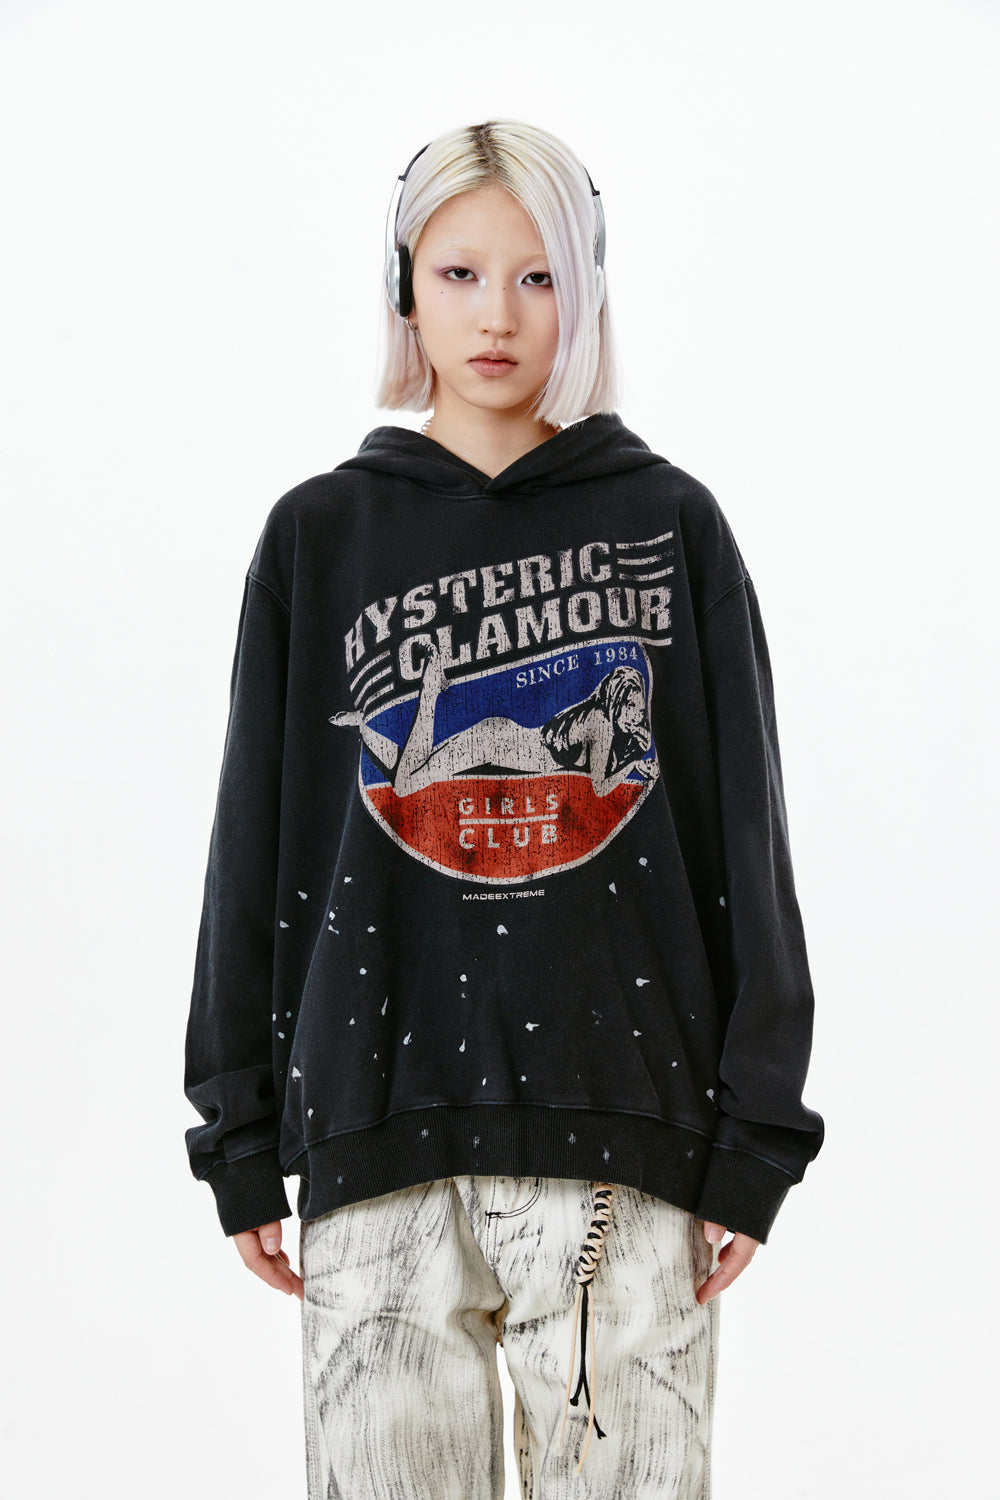 HYSTERIC CLAMOUR HOODIE